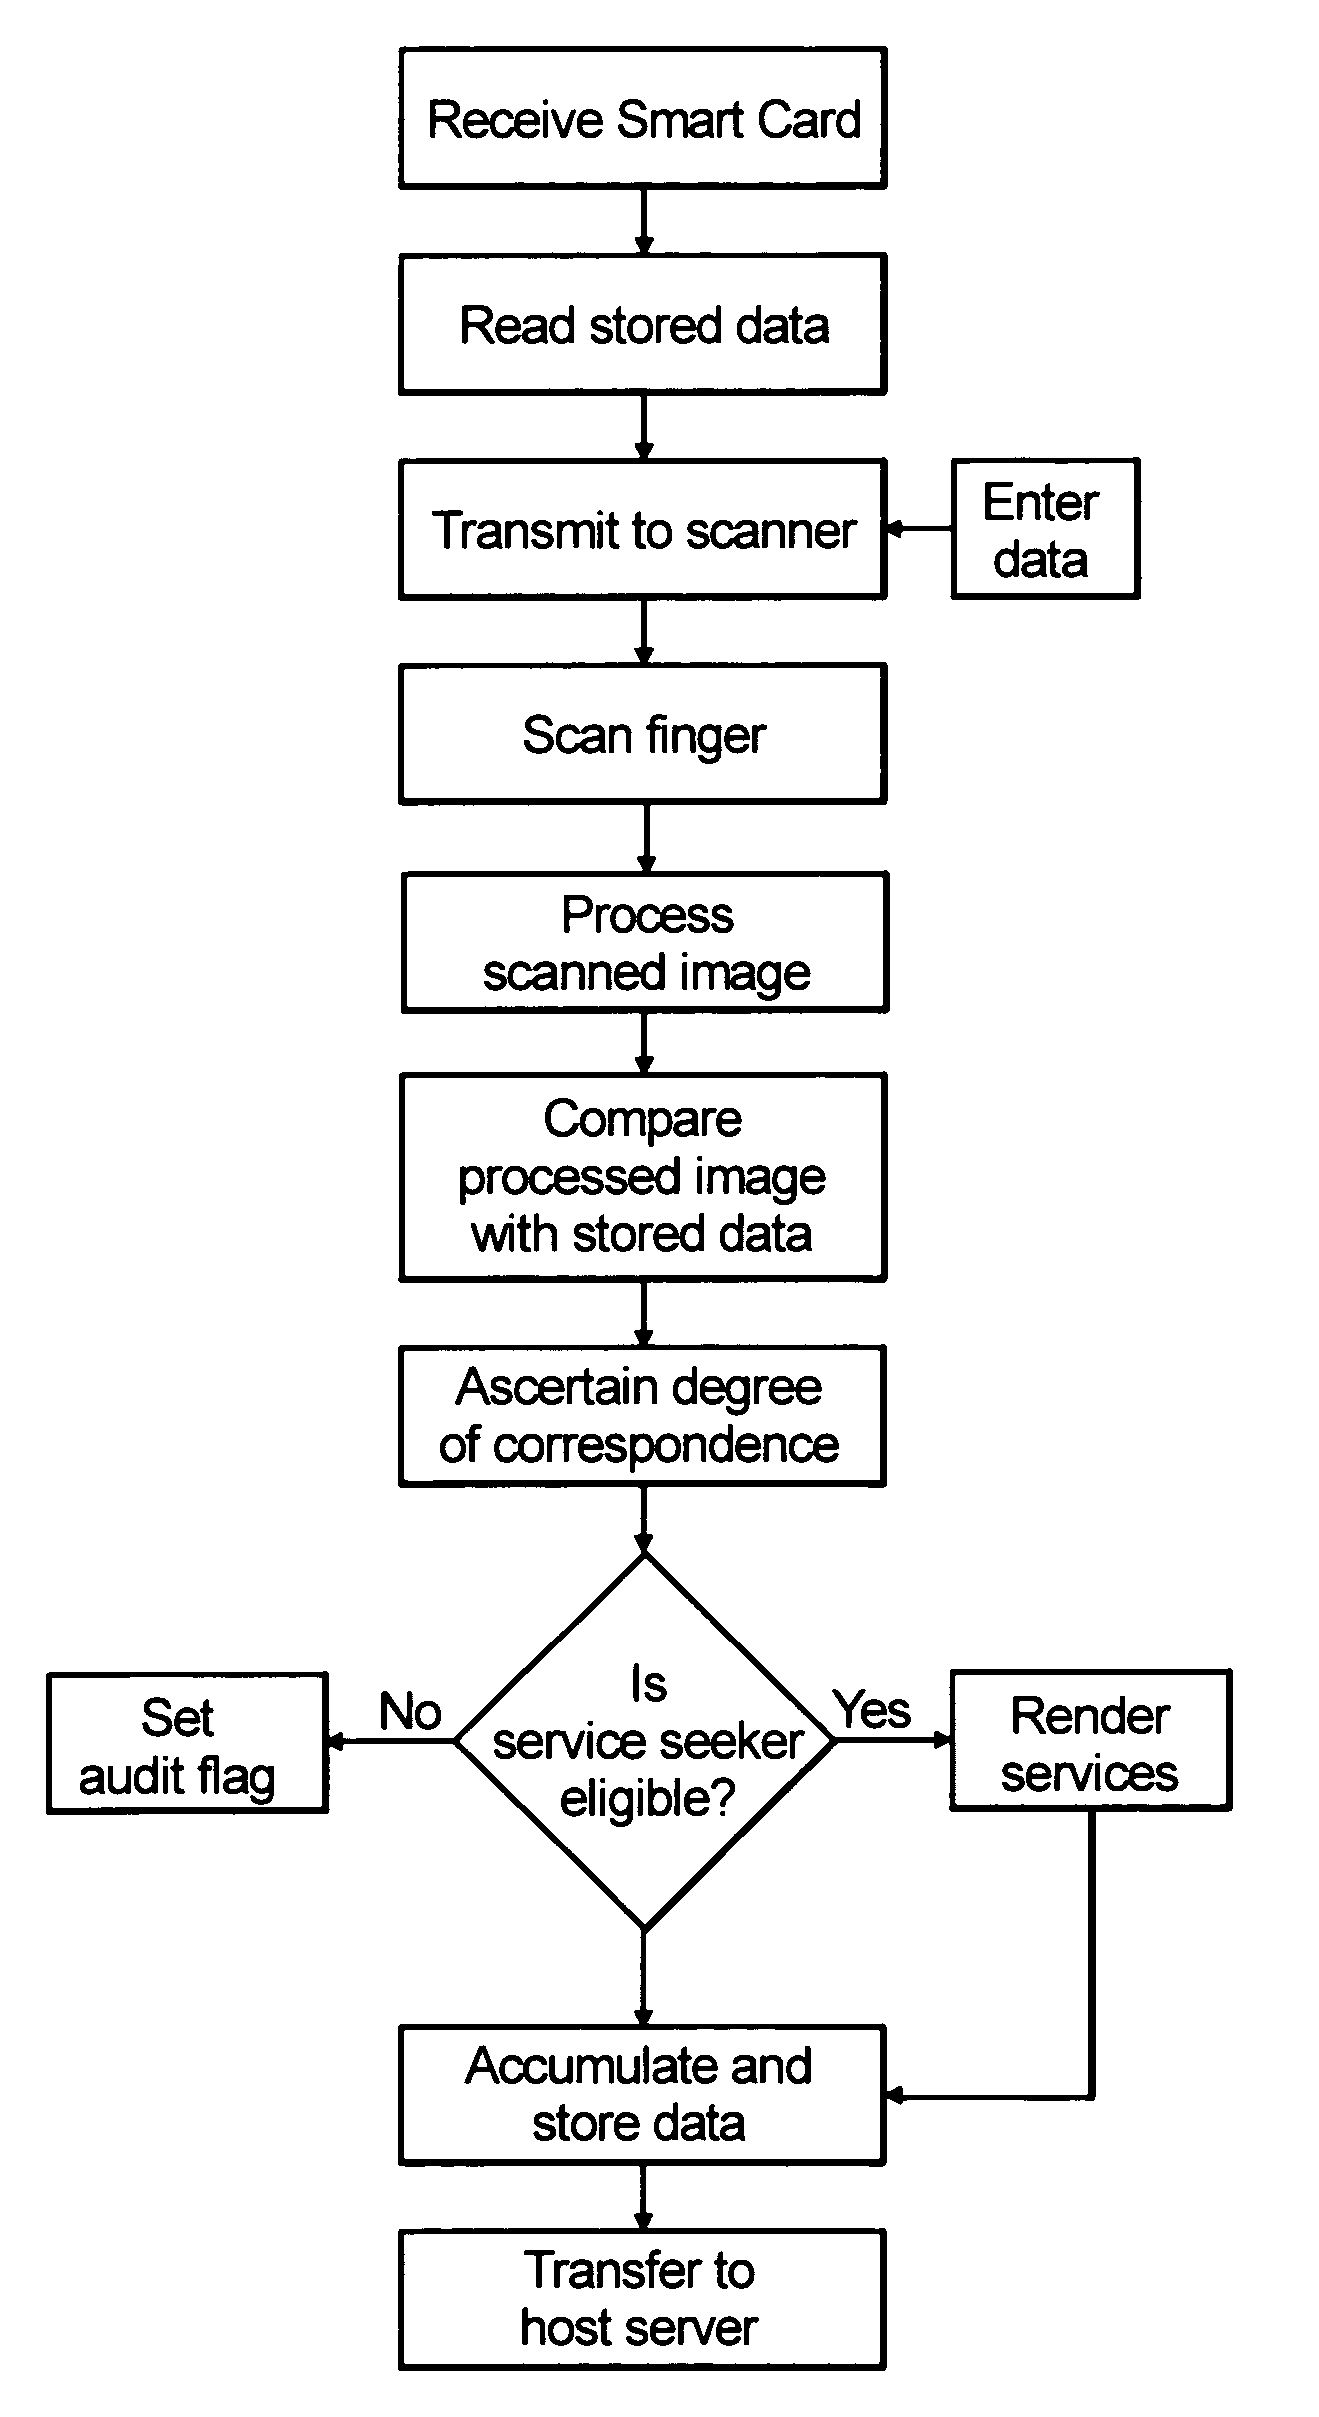 System and method for reducing healthcare fraud using biometric technology